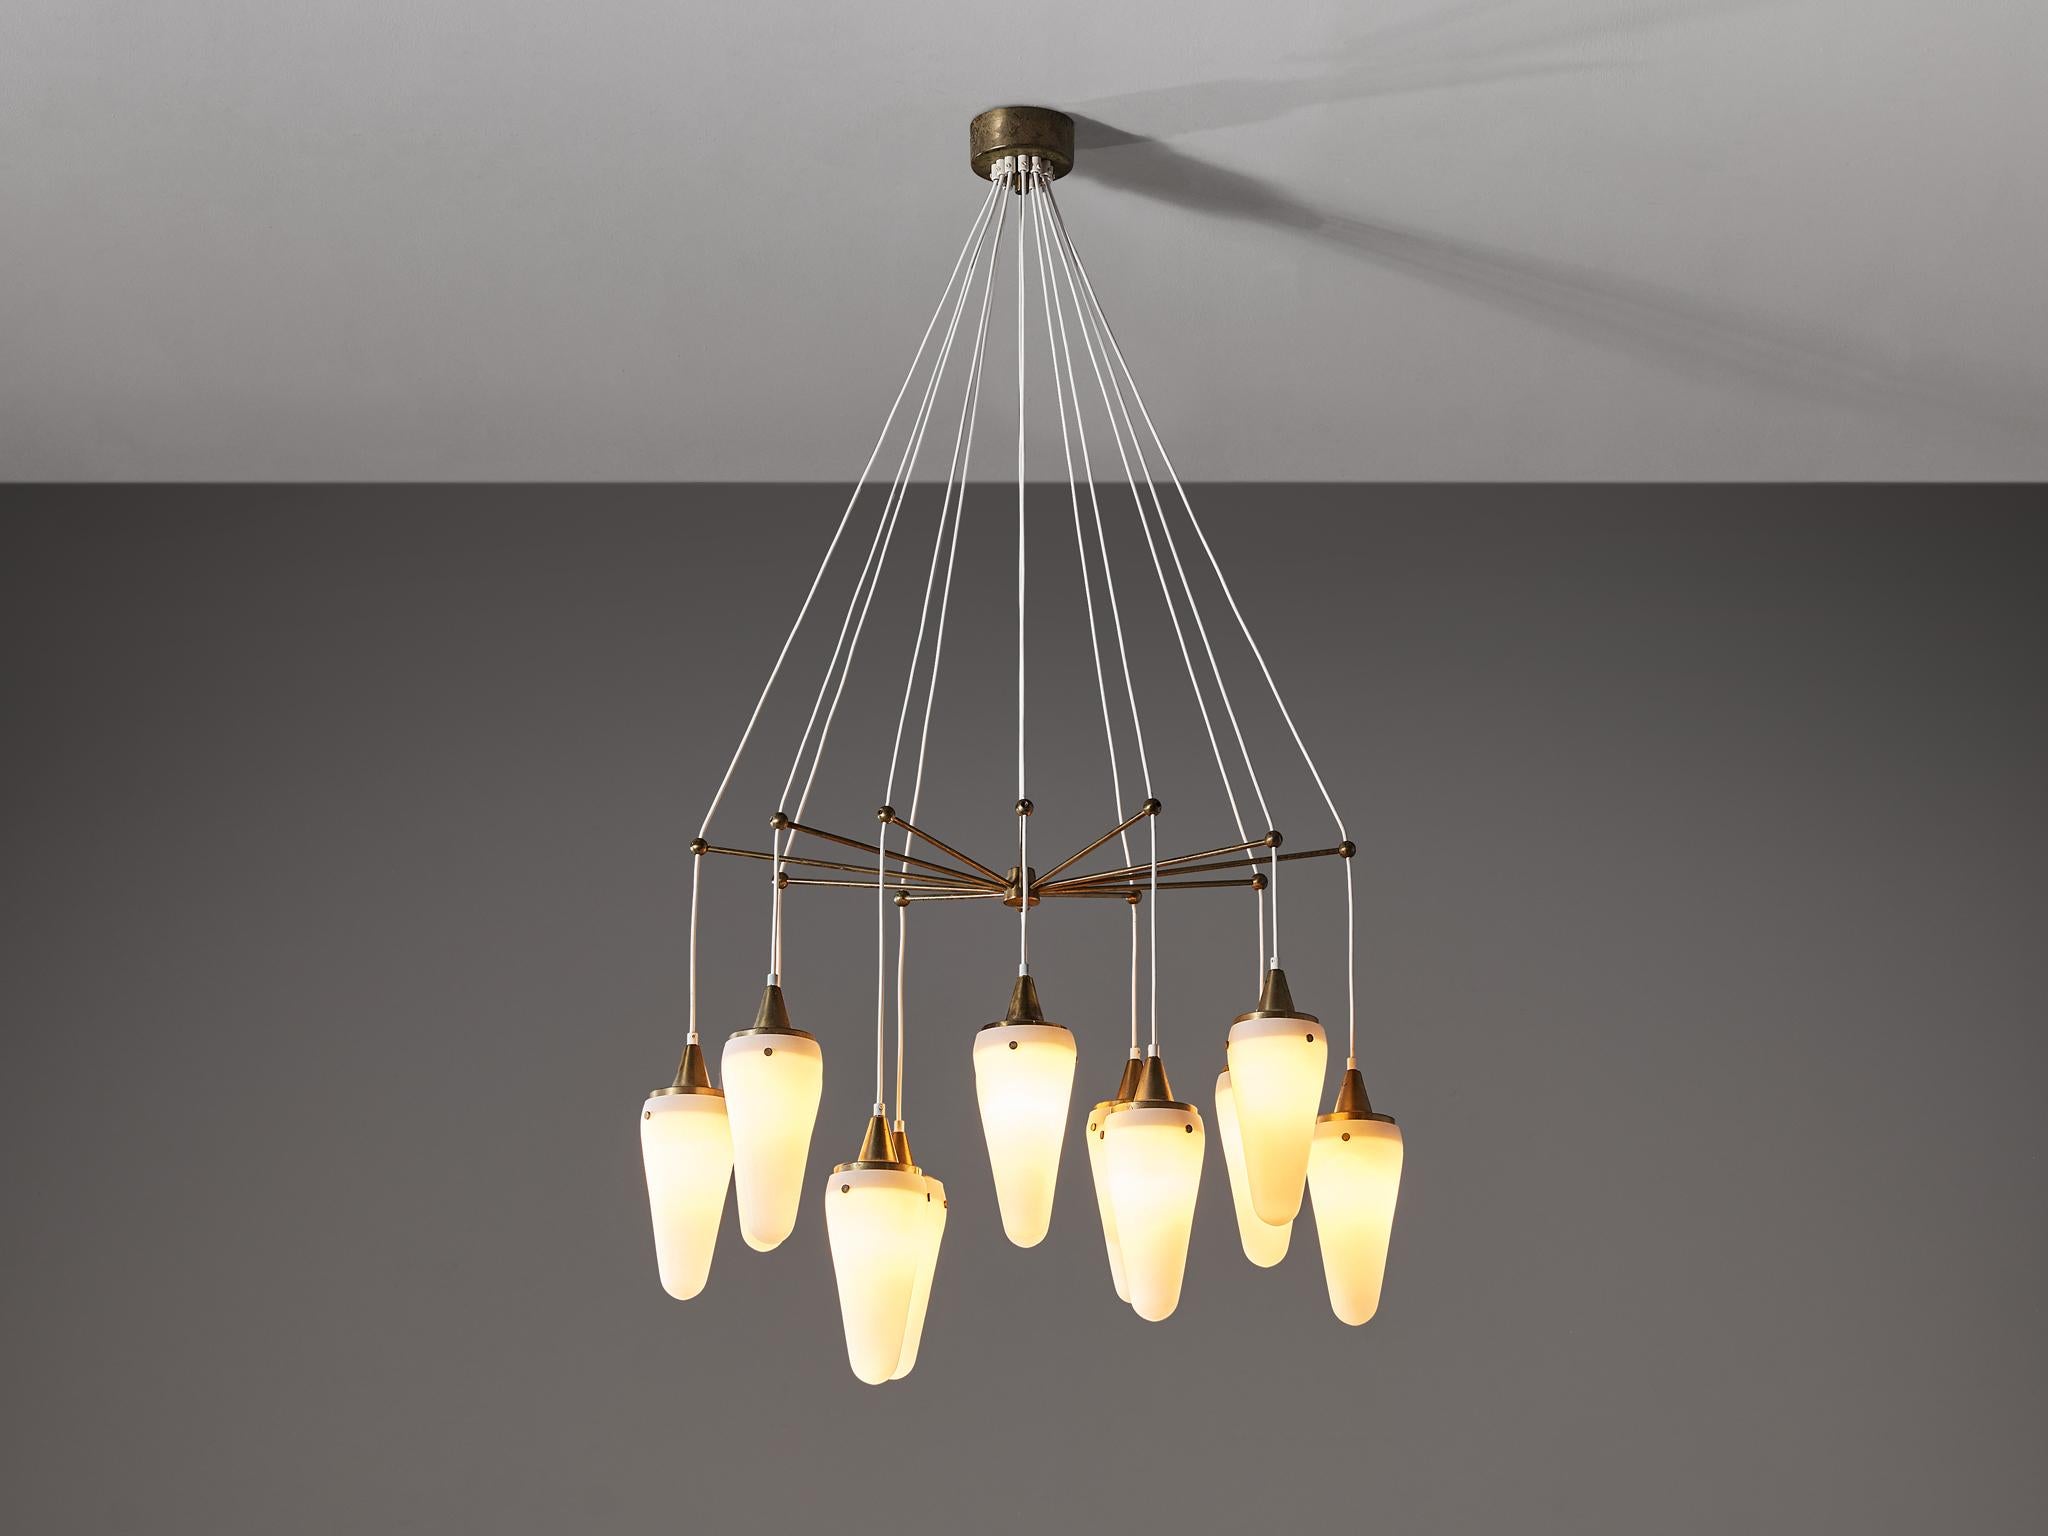 Hans-Agne Jakobsson for Hans-Agne Jakobsson AB in Markaryd, chandelier, brass, matted glass, Sweden, 1950s/1960s 

Designed by the renowned Swedish master Hans-Agne Jakobsson, this impressive chandelier has a stunning and demanding presence.